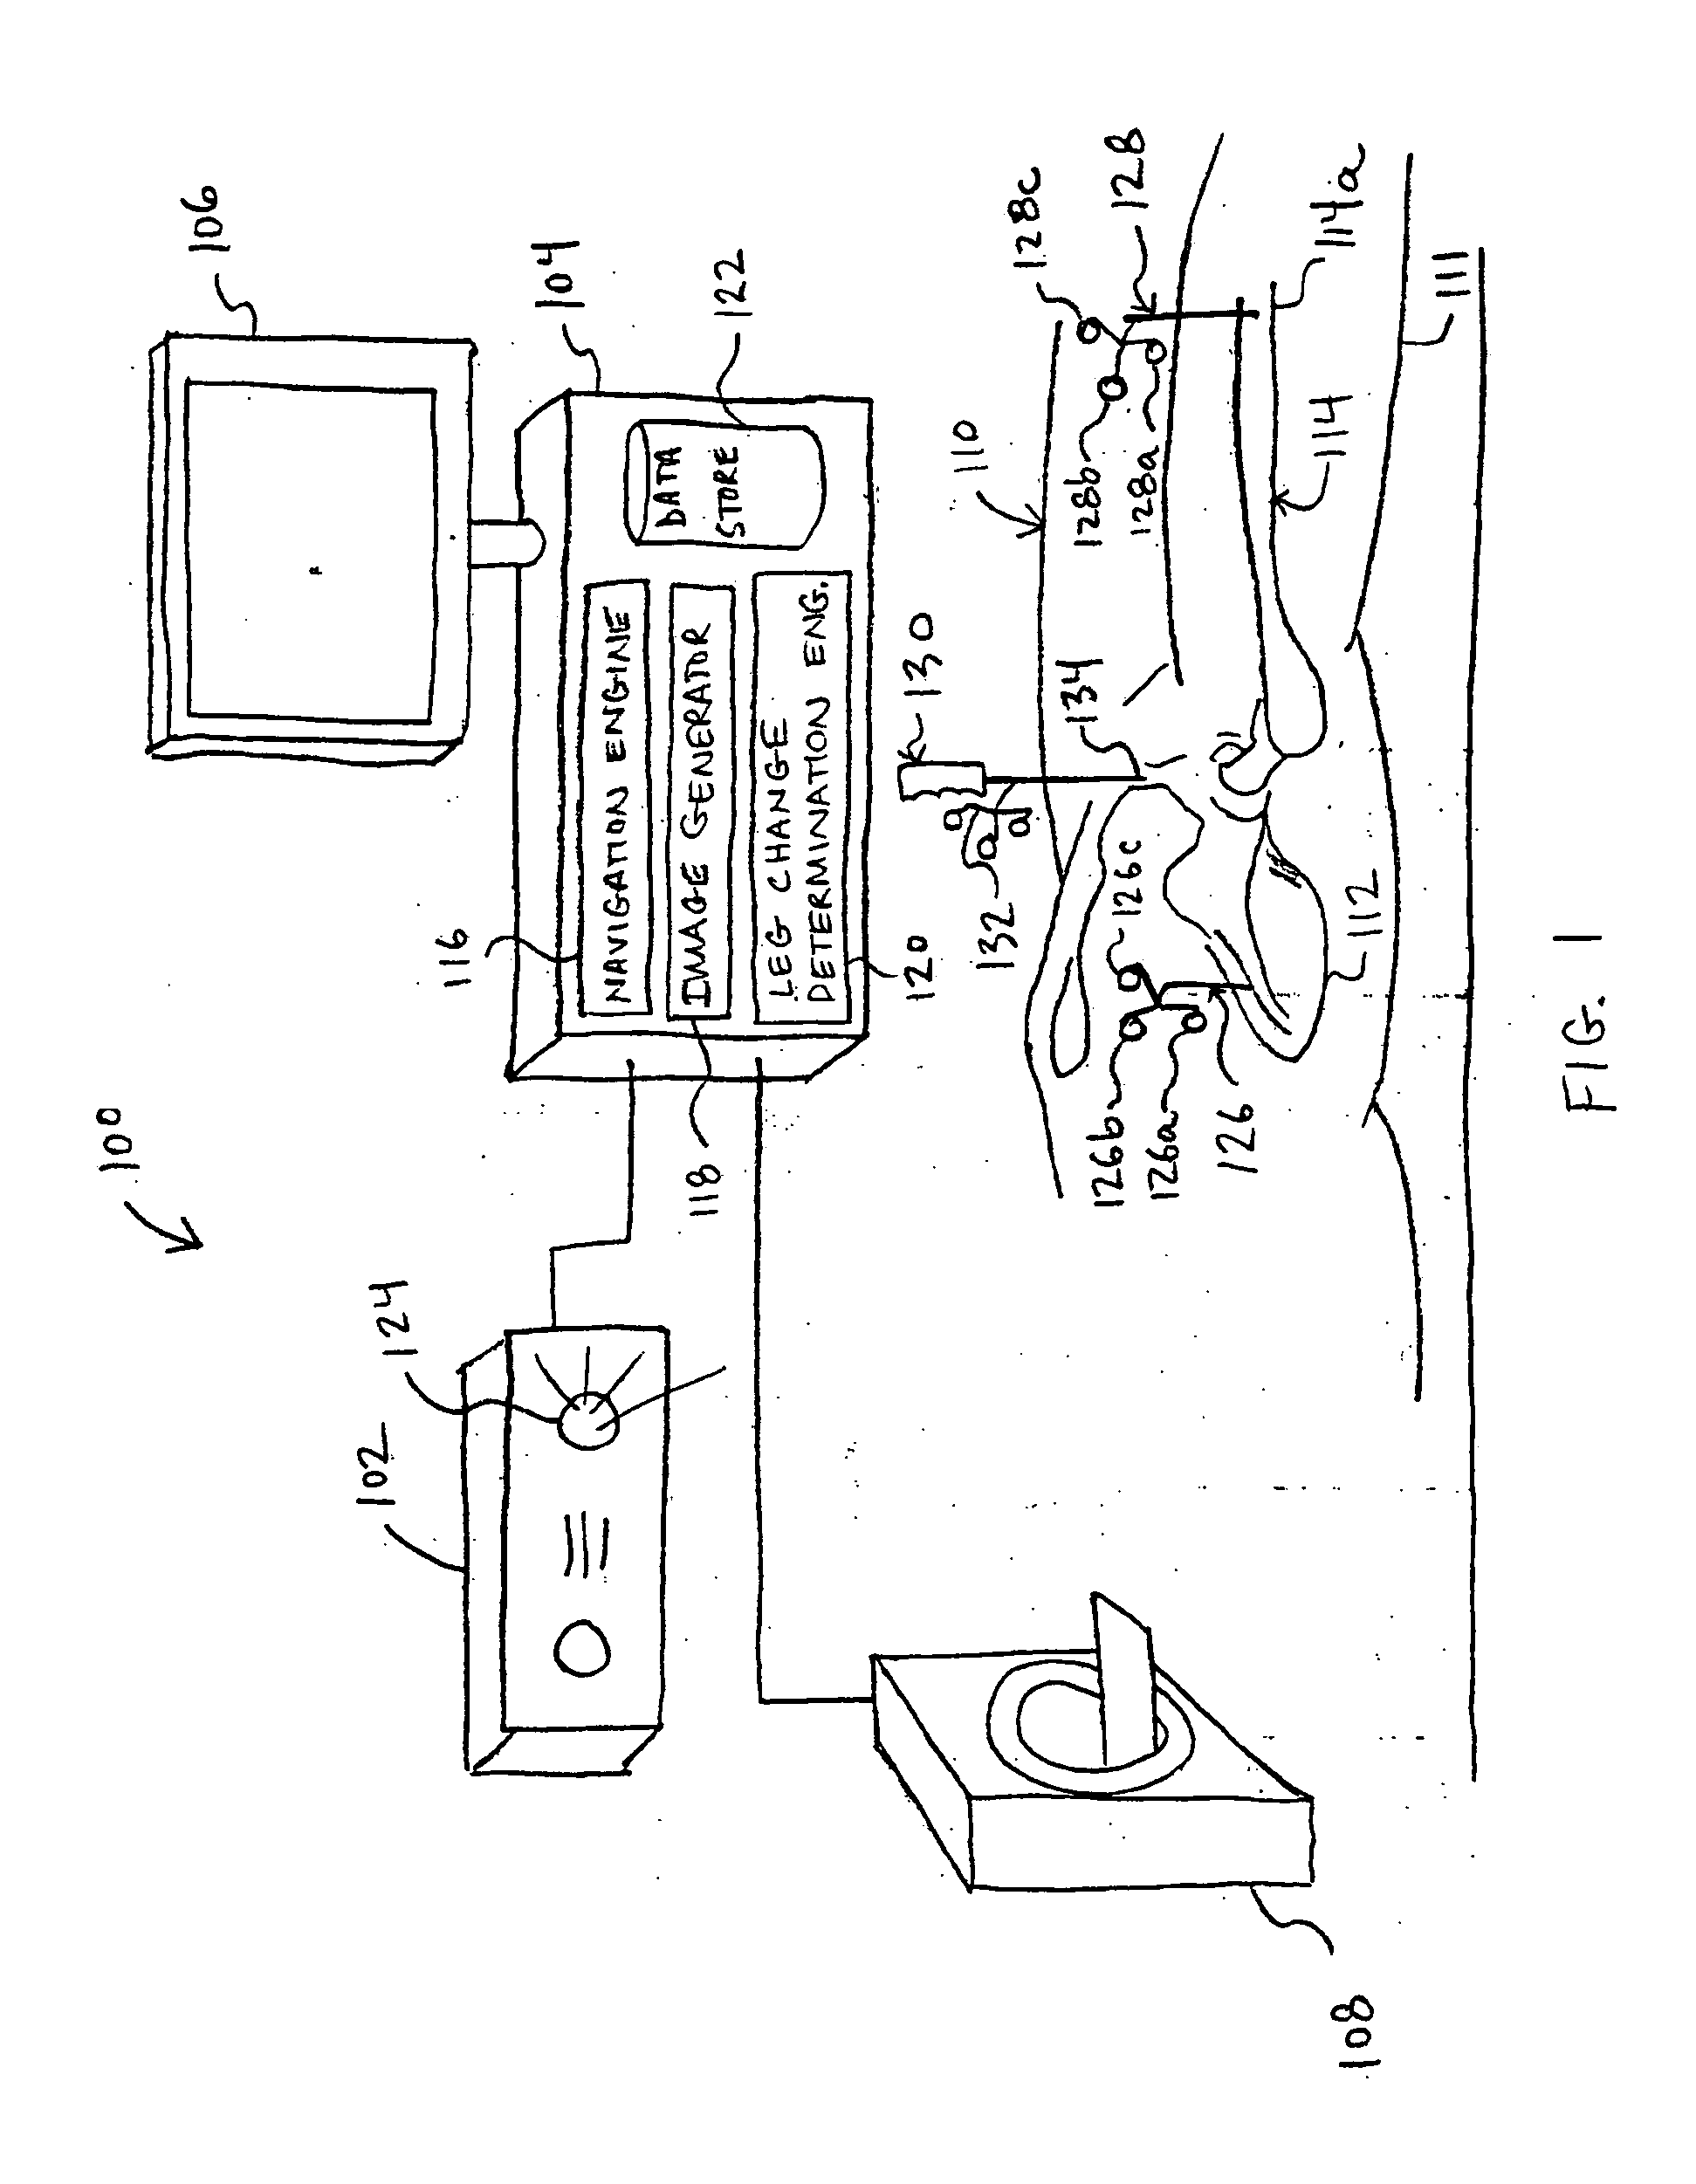 System and method for facilitating hip surgery